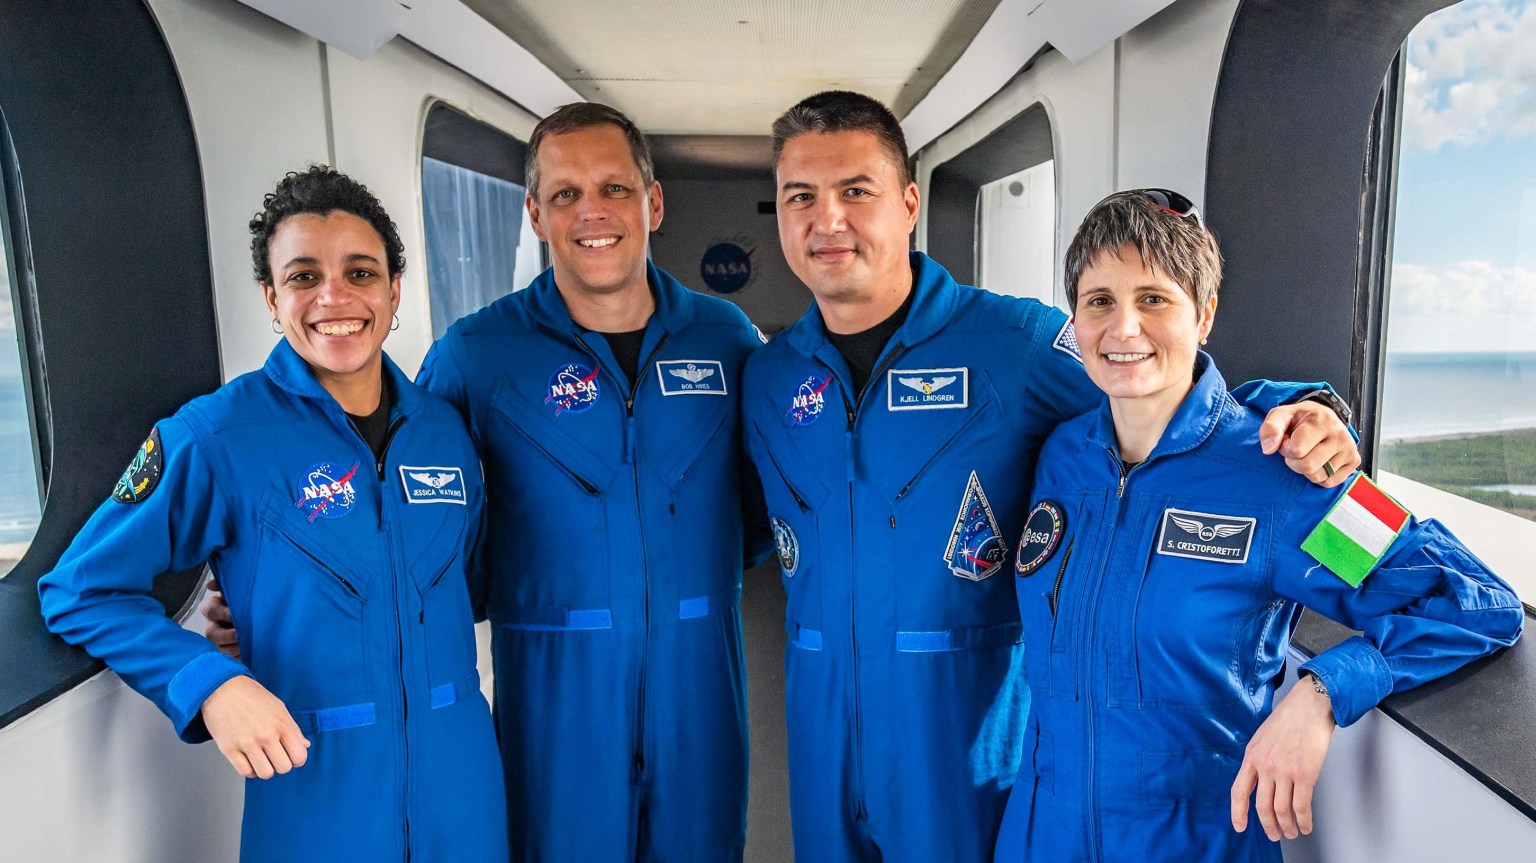 NASA’s SpaceX Crew-4 astronauts participate in a training session at Kennedy Space Center in Florida. From left to right: NASA astronaut and SpaceX Crew-4 mission specialist Jessica Watkins; NASA astronaut and SpaceX Crew-4 pilot Robert “Bob” Hines; NASA astronaut and SpaceX Crew-4 commander Kjell Lindgren; and ESA (European Space Agency) astronaut and Crew-4 mission specialist Samantha Cristoforetti of Italy.